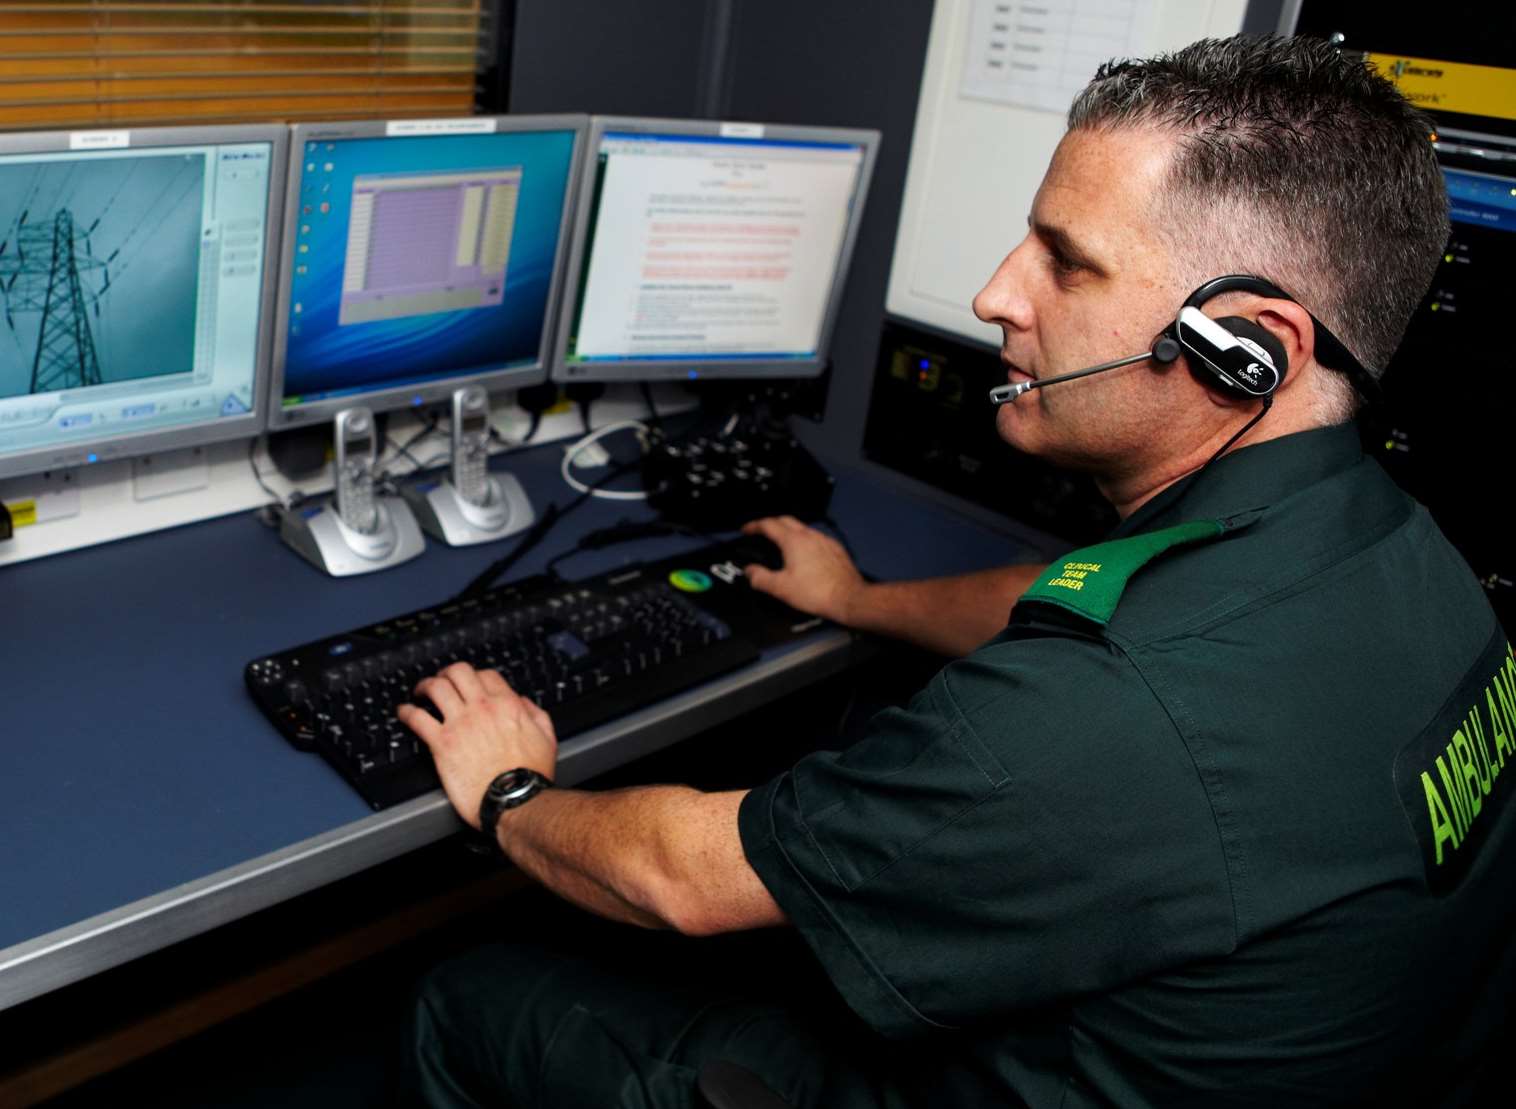 Last year SECAmb received more than 10,000 emergency calls between Good Friday and Easter Monday